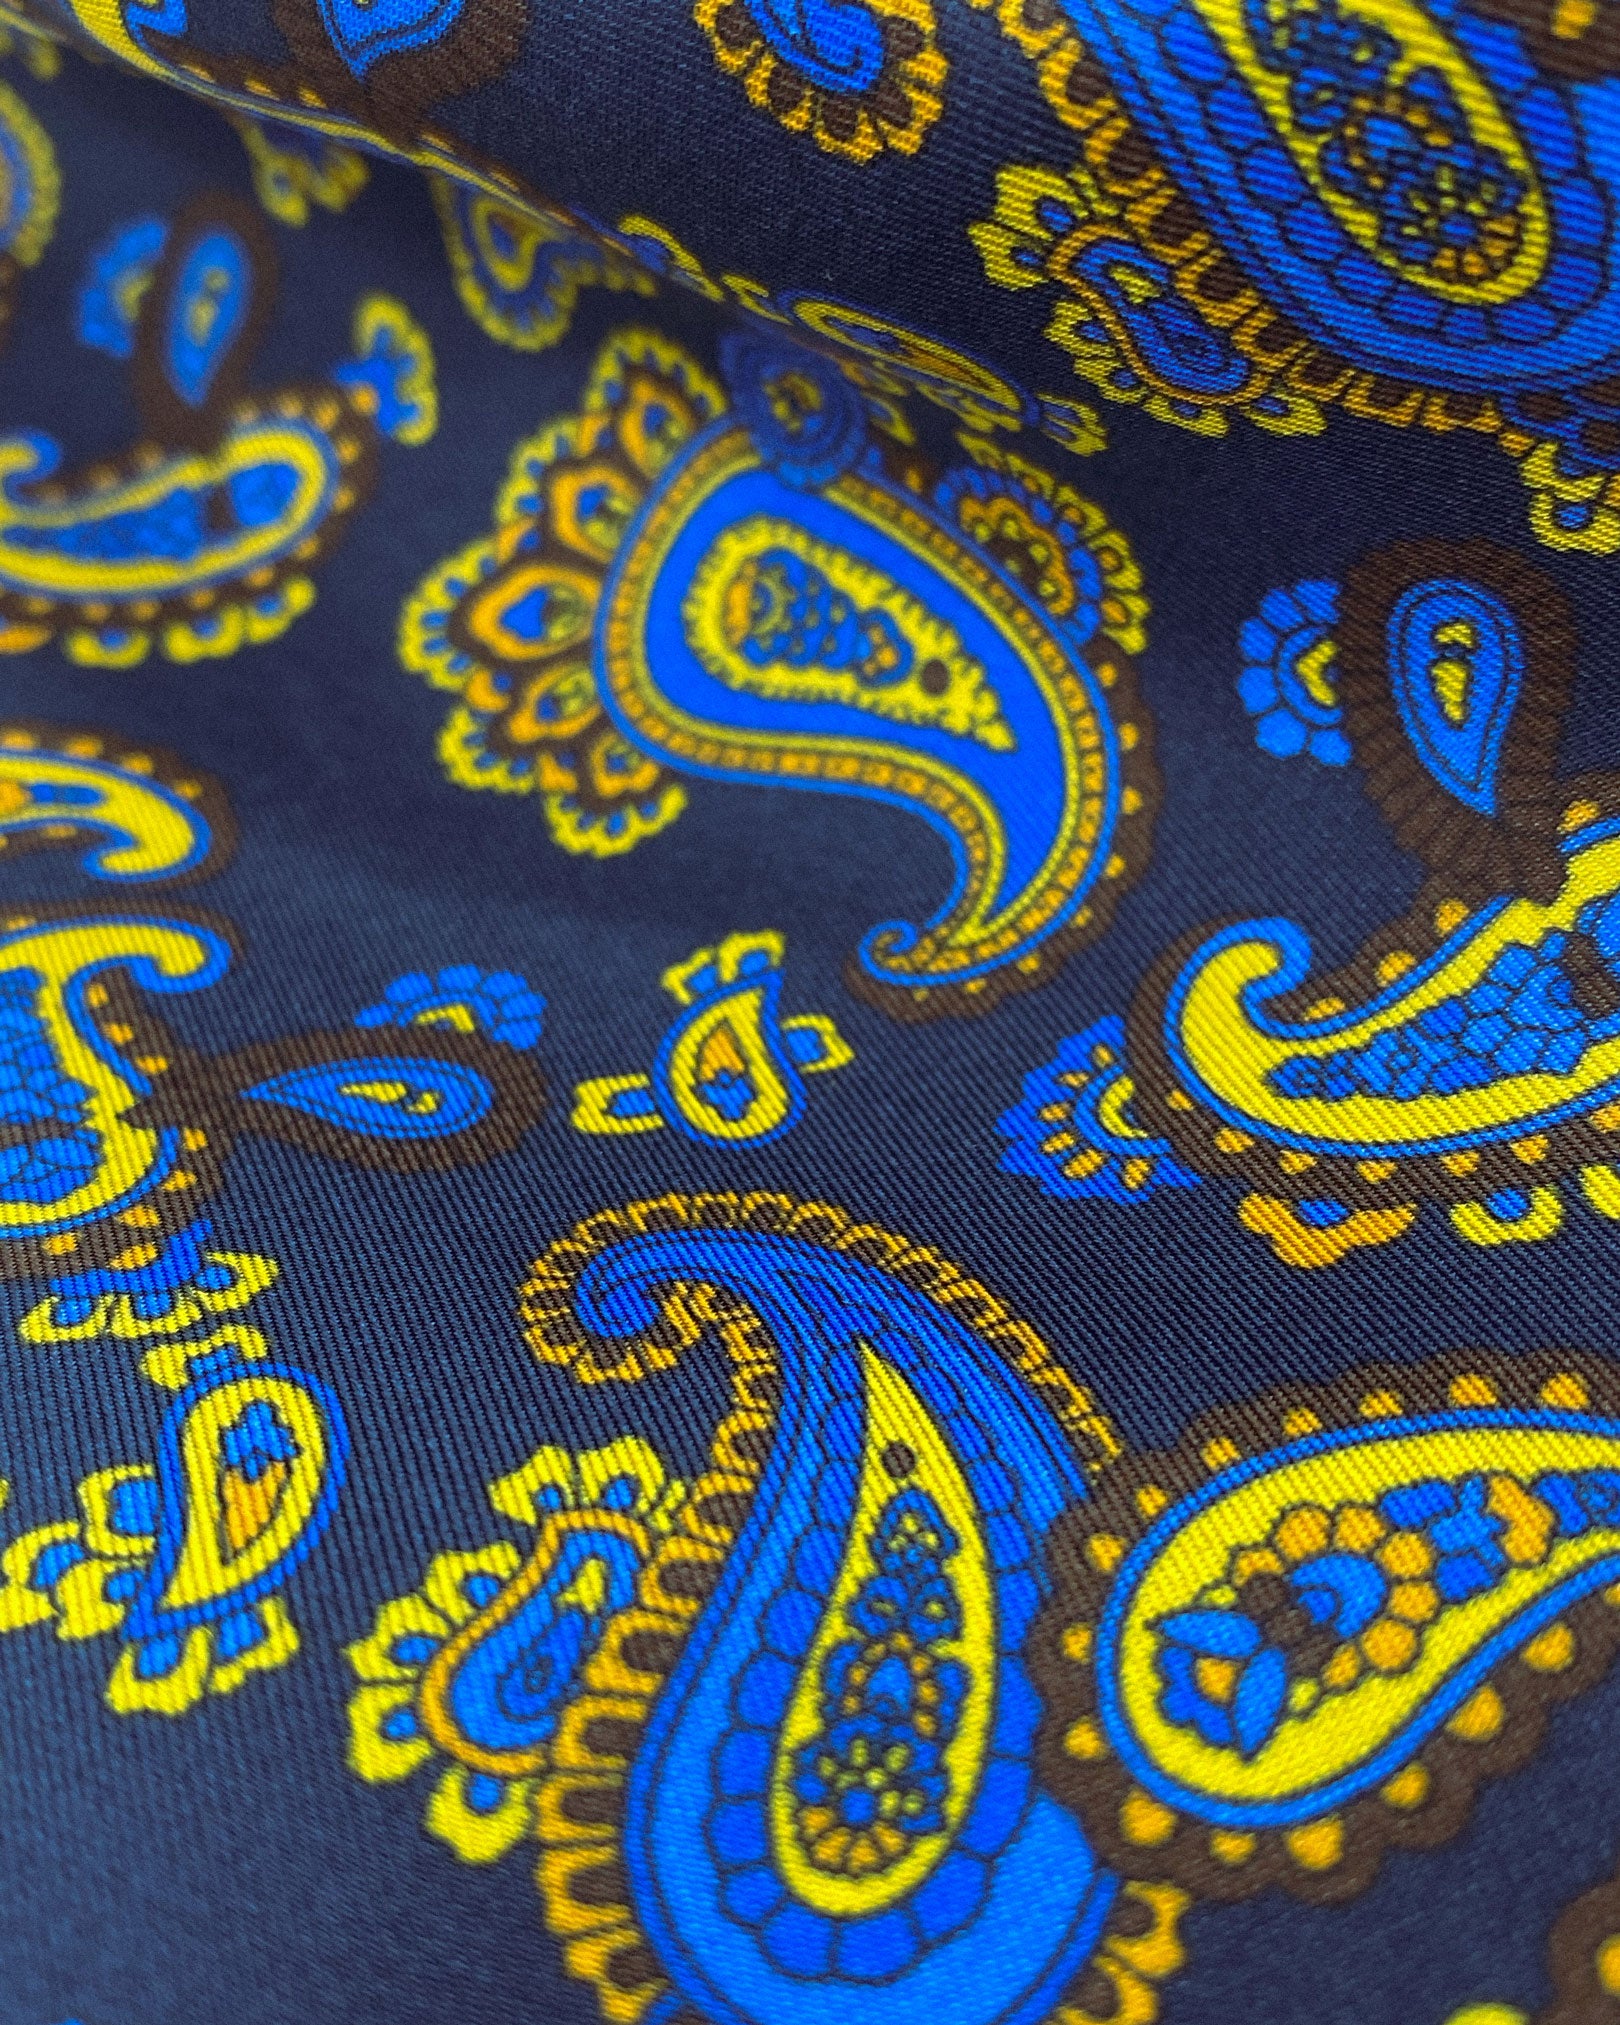 Ruffled close-up view of the Lucie silk aviator scarf, presenting a closer view of the intricate swirls of blue and yellow paisley.